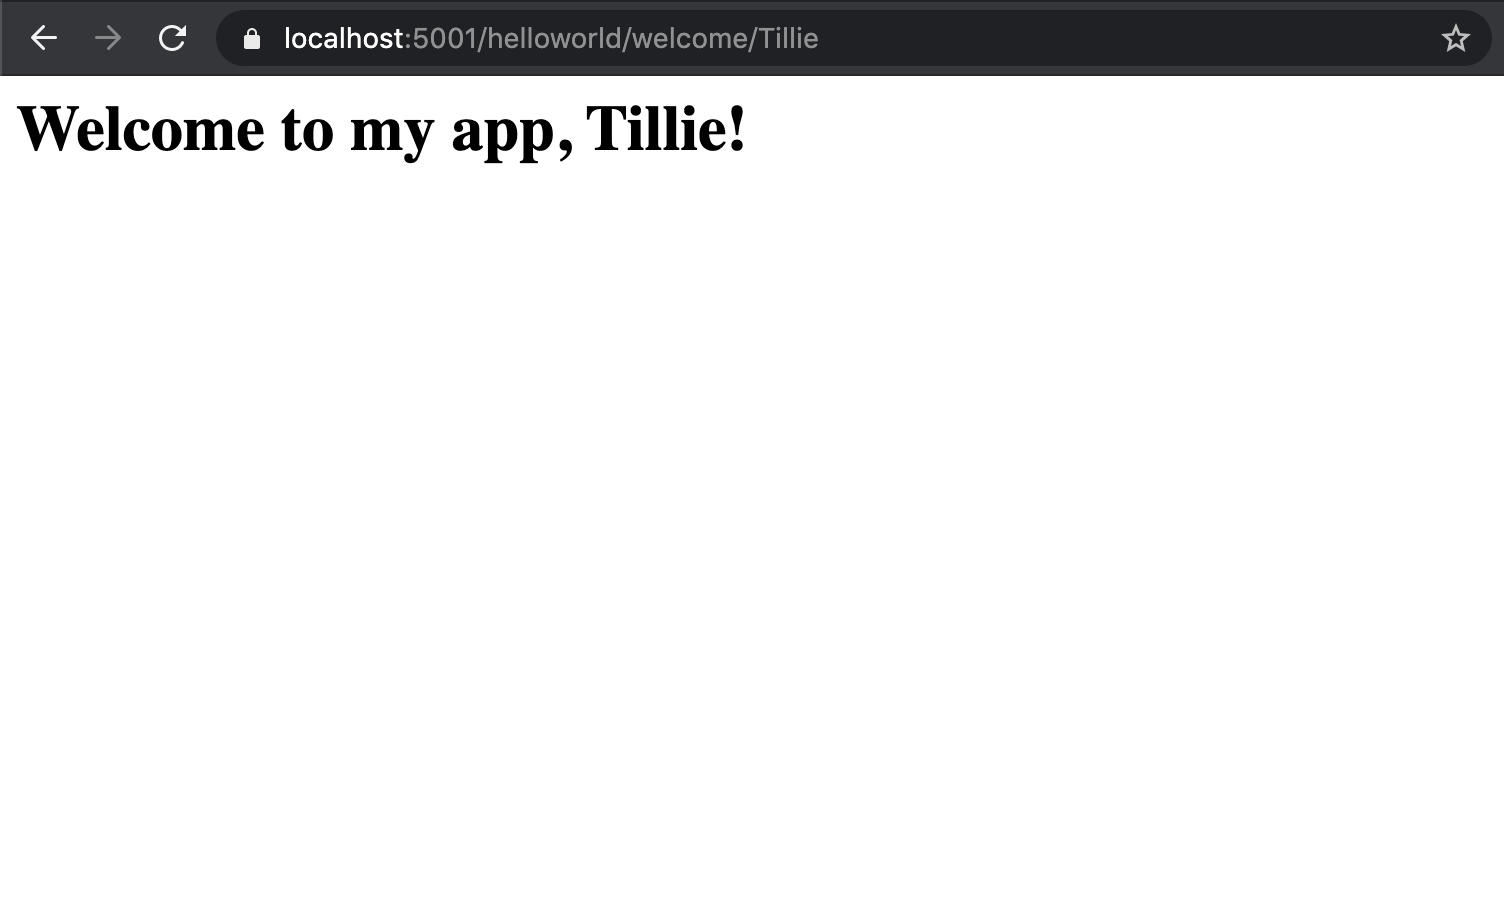 Webpage displaying welcome to my app, Tillie